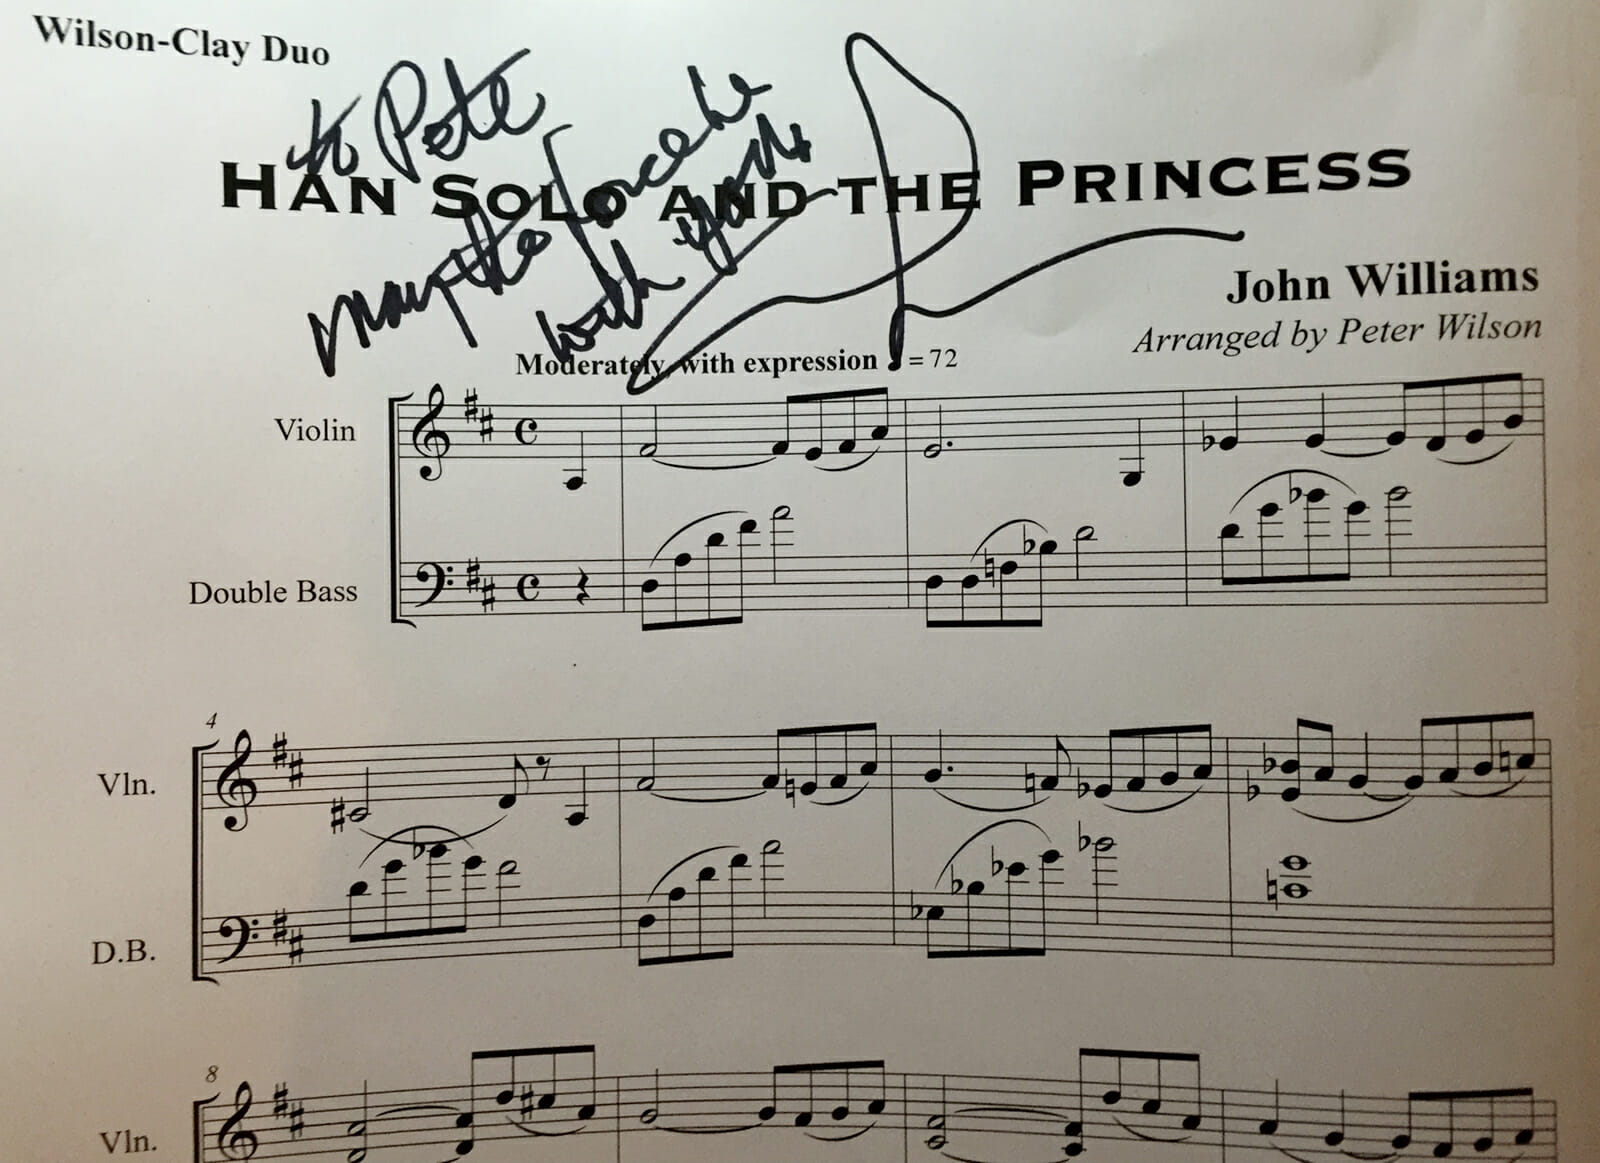 Music signed by Star Wars creator George Lucas